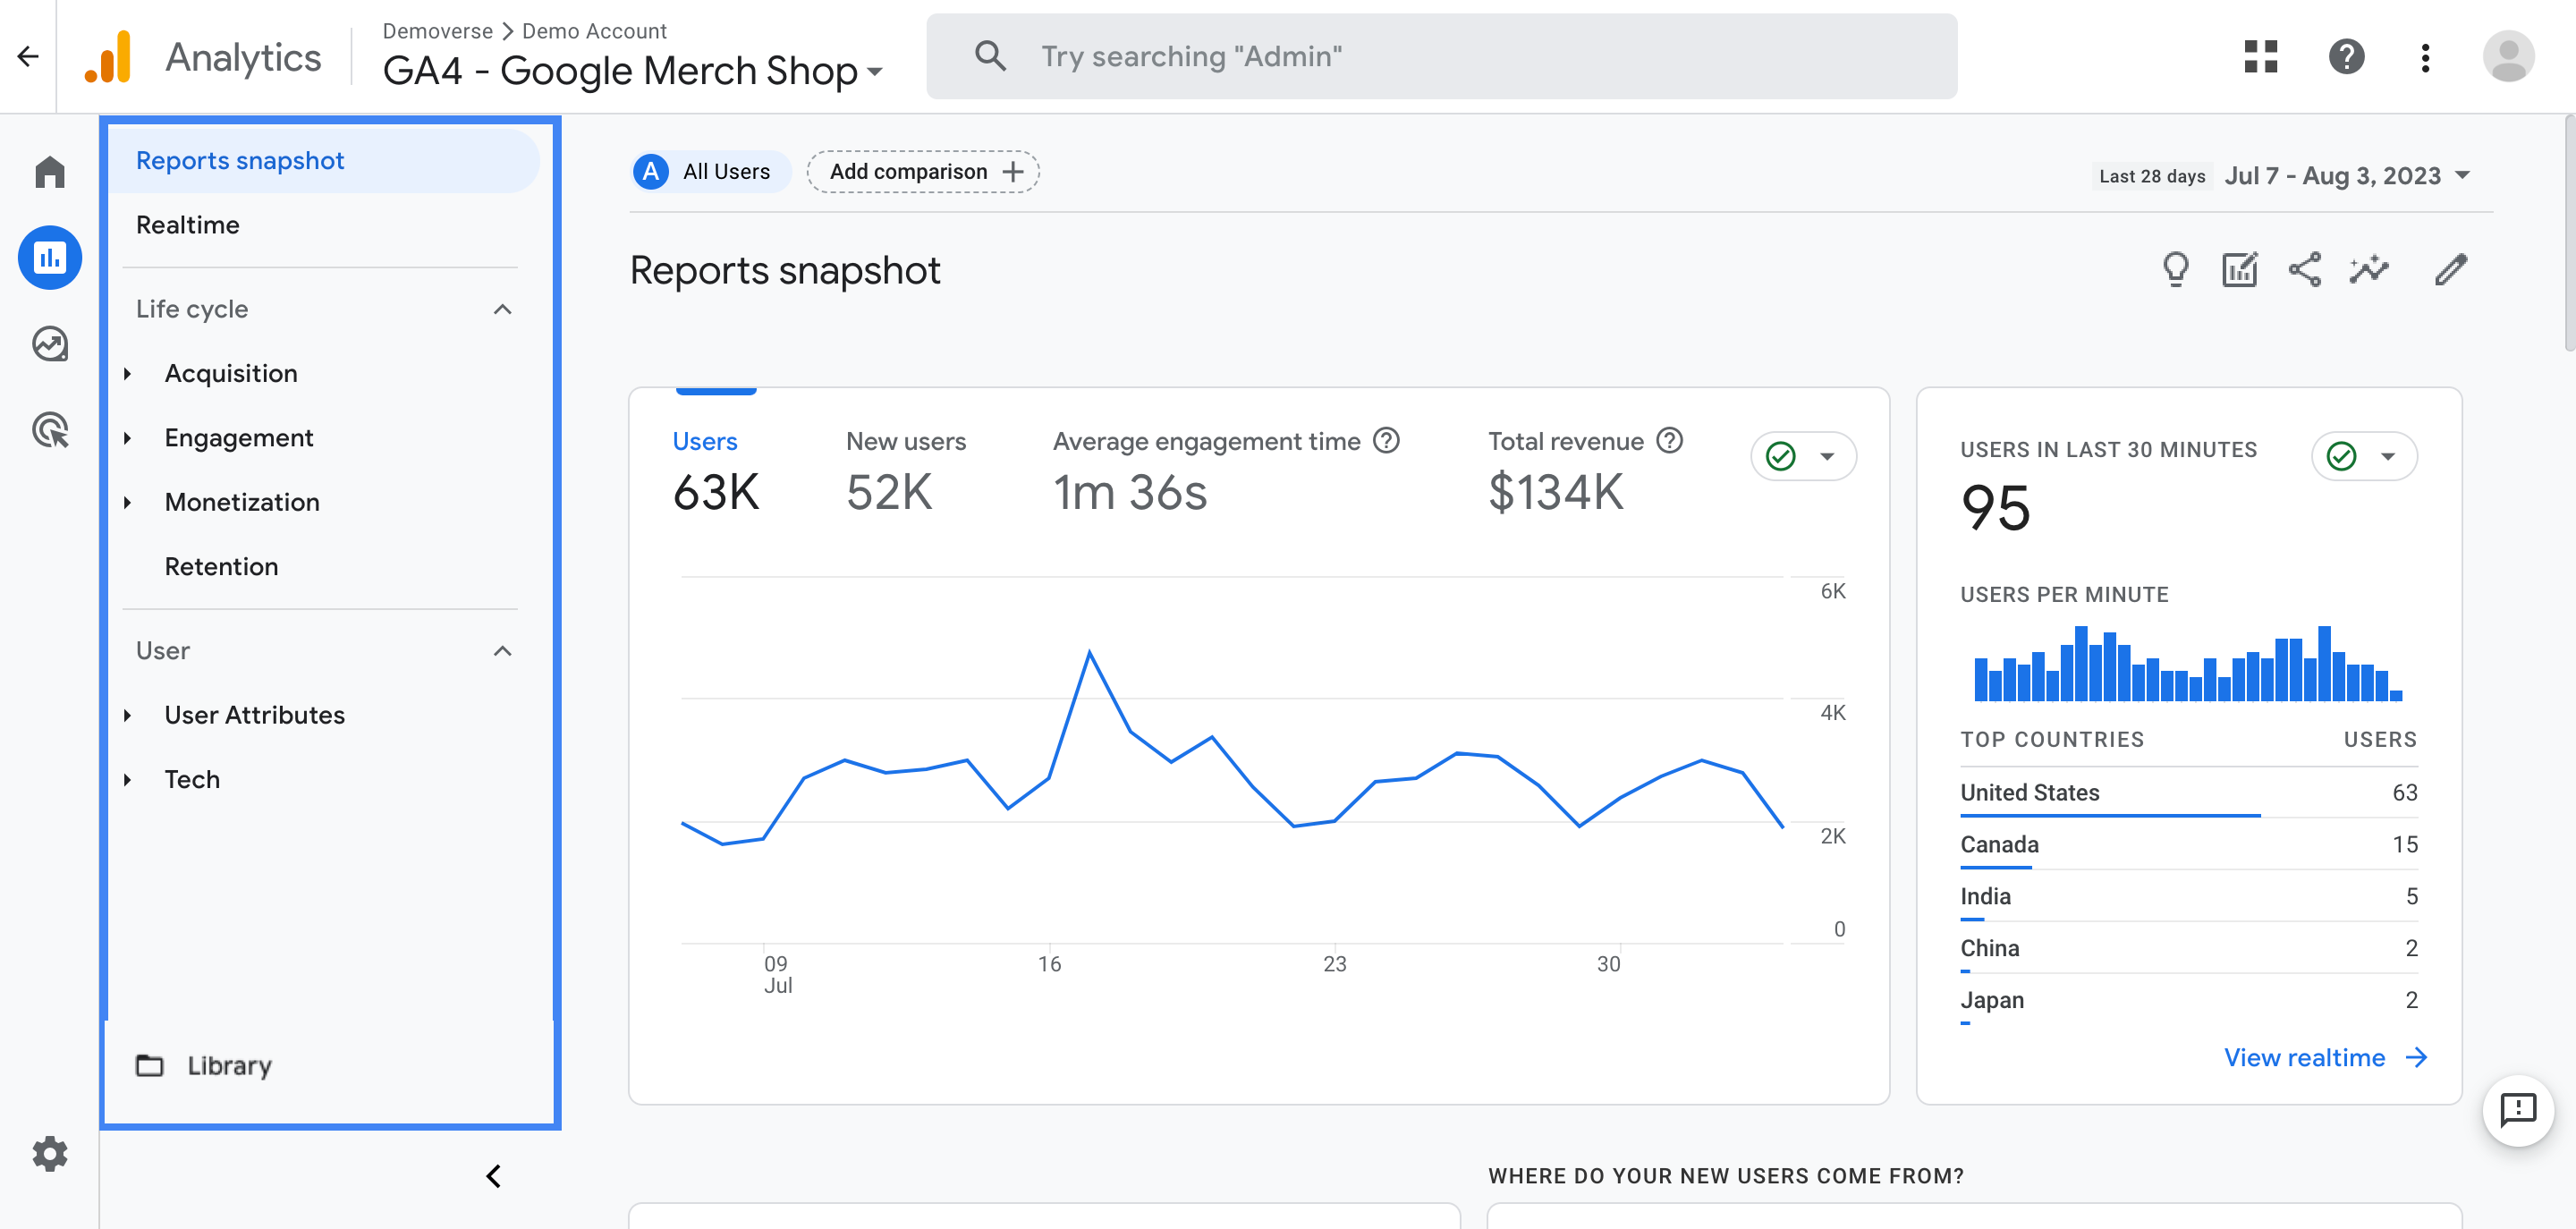 Google Analytics provides companies with a platform for website analytics